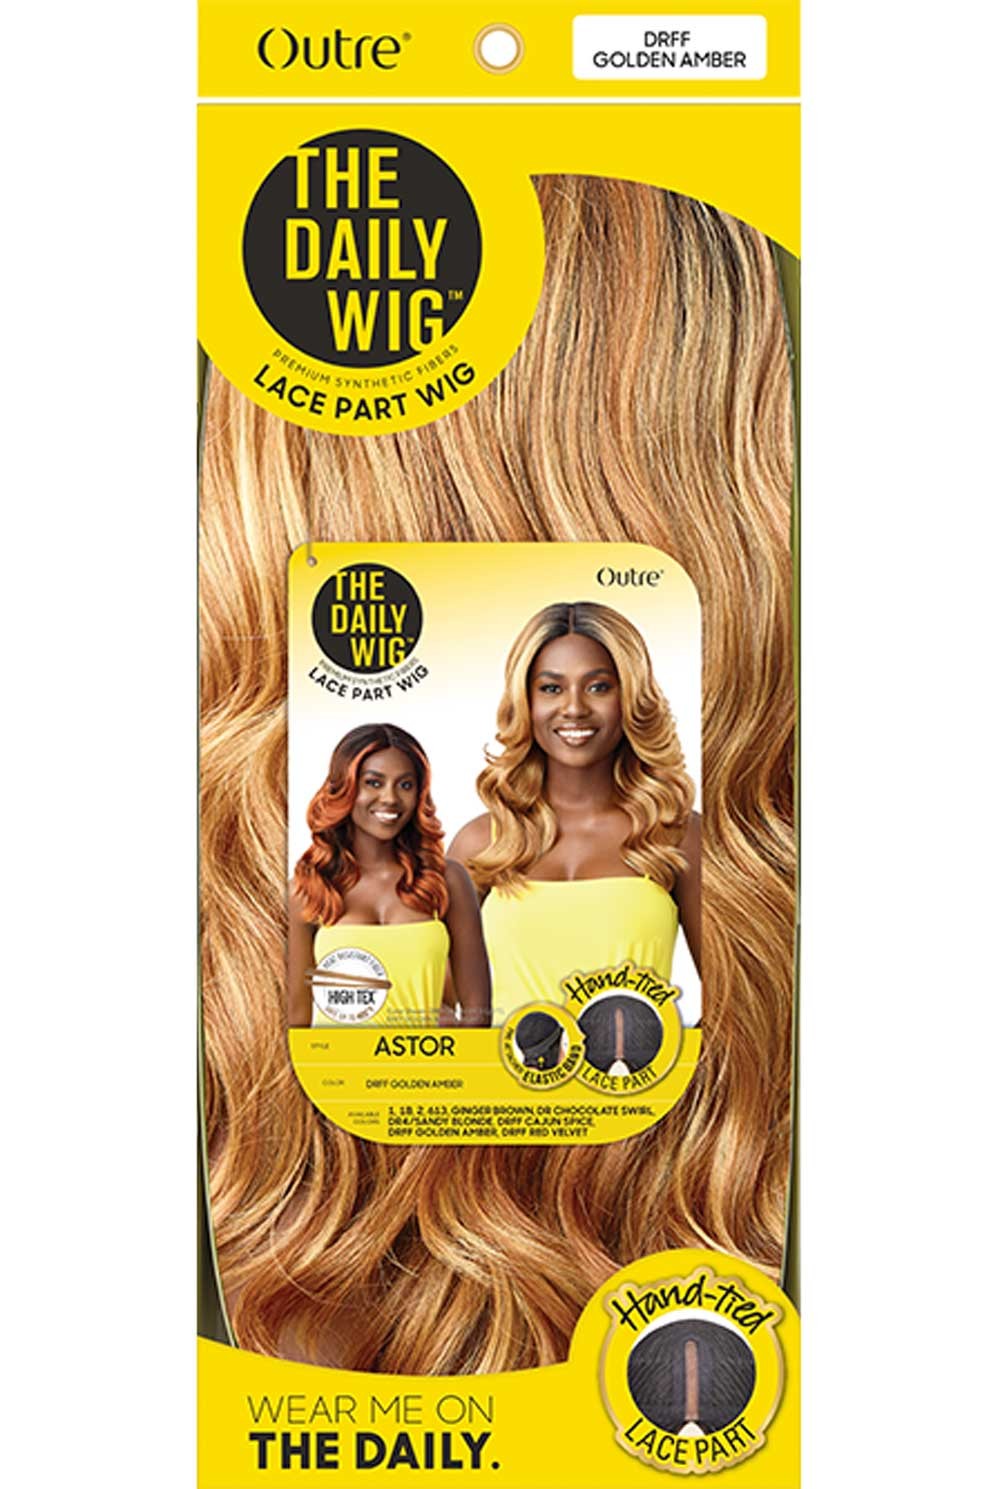 Outre The Daily Wig Premium Synthetic Lace Part Wig Astor Elevate Styles